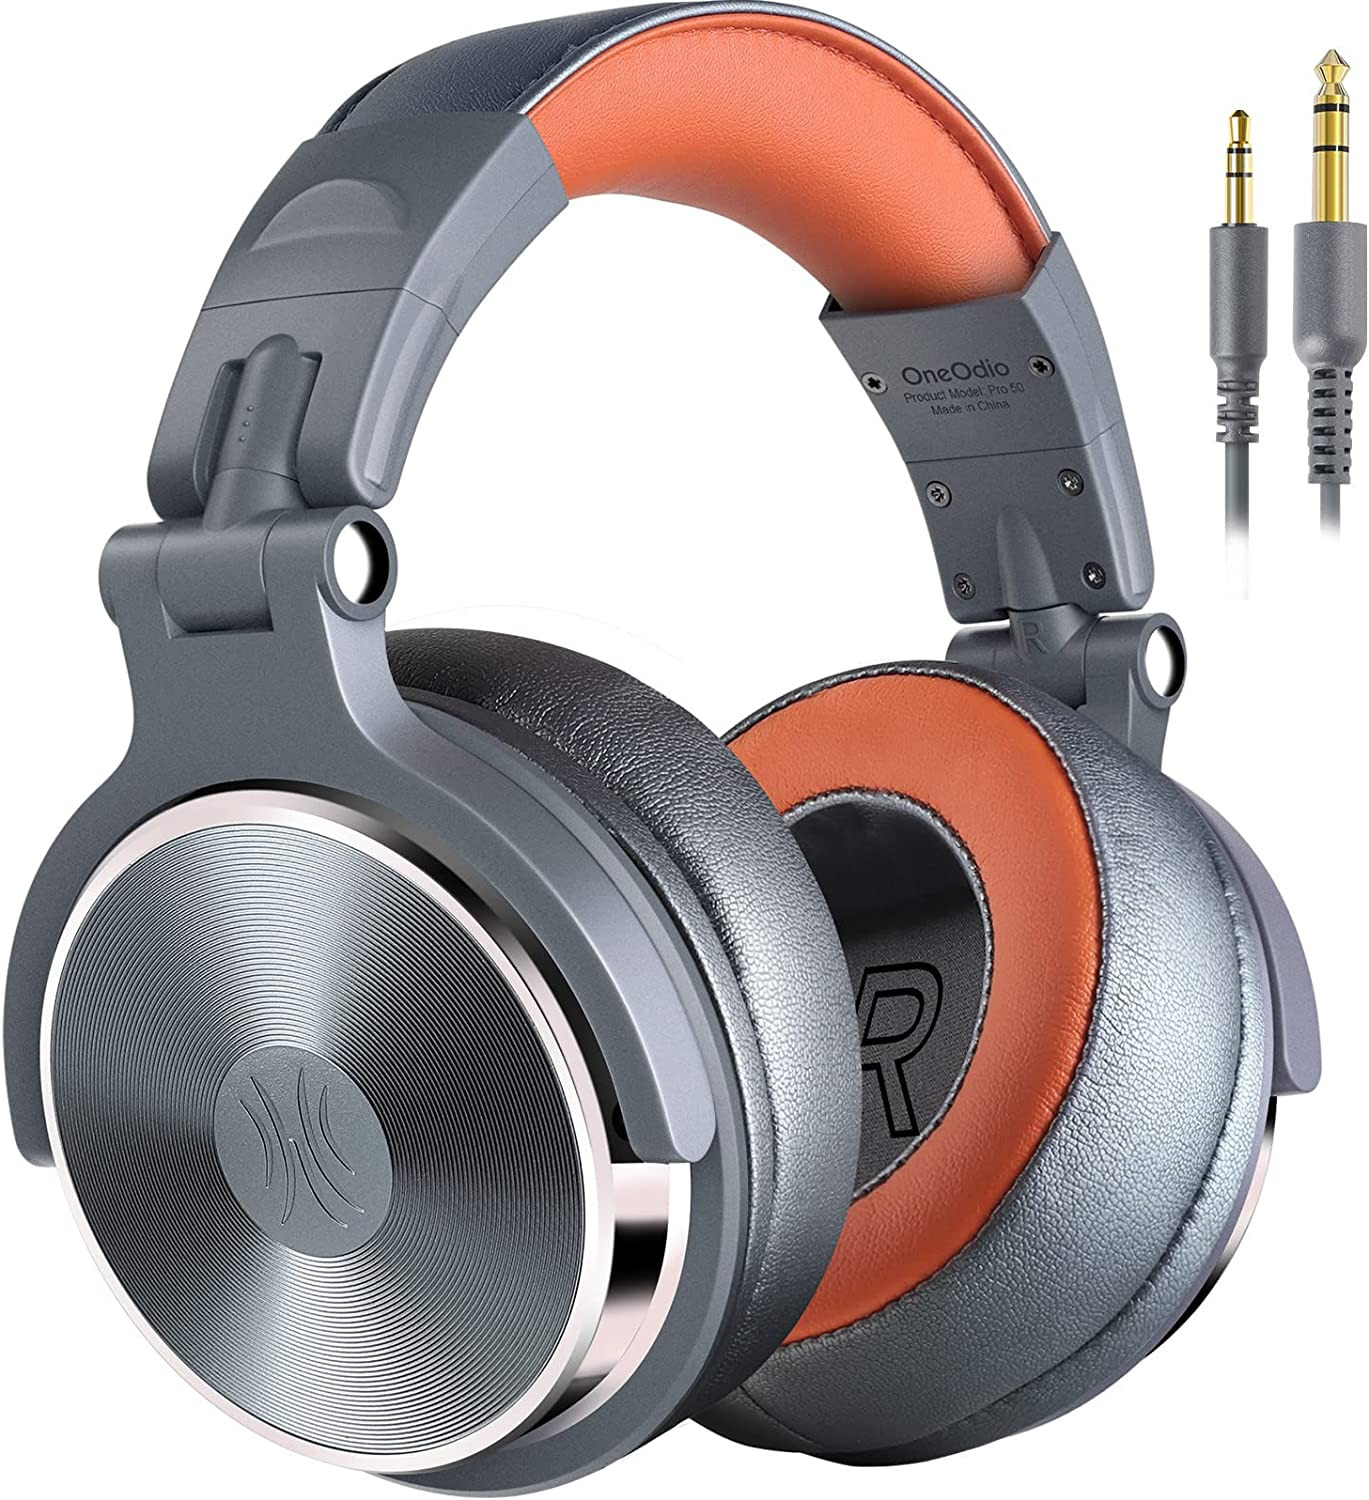 Hi-Res over Ear Headphones for Studio Monitoring and Mixing, Professional Adapte